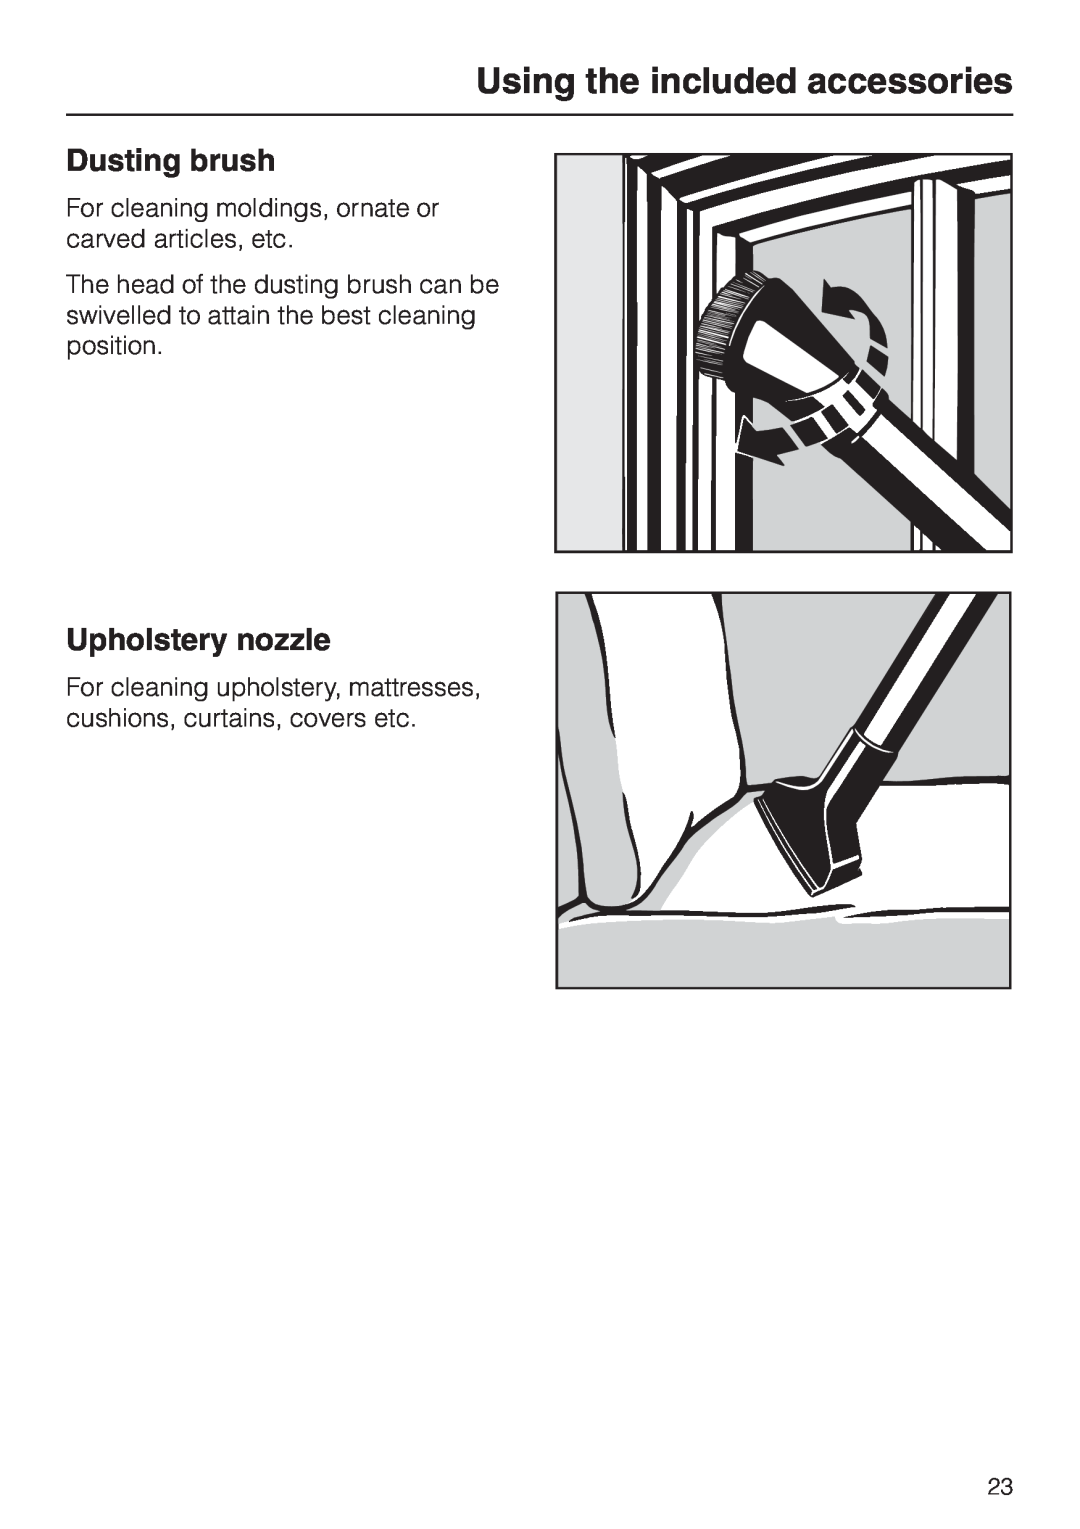 Miele S 558 manual Dusting brush, Upholstery nozzle, Using the included accessories 